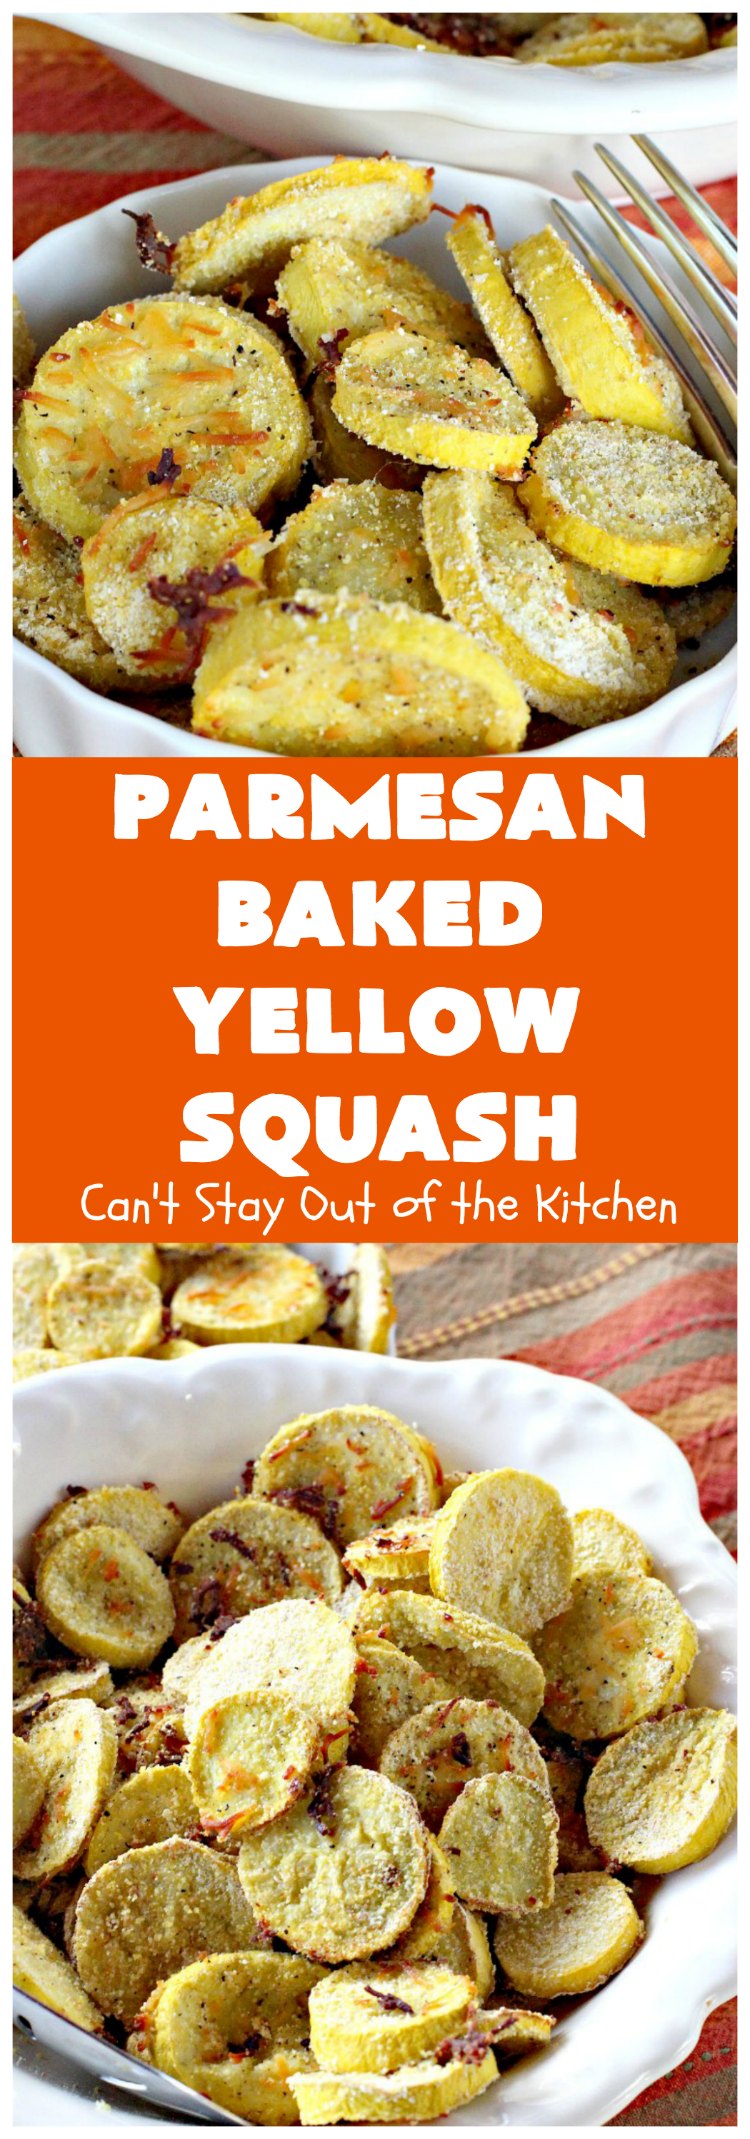 Parmesan Baked Yellow Squash | Can't Stay Out of the Kitchen